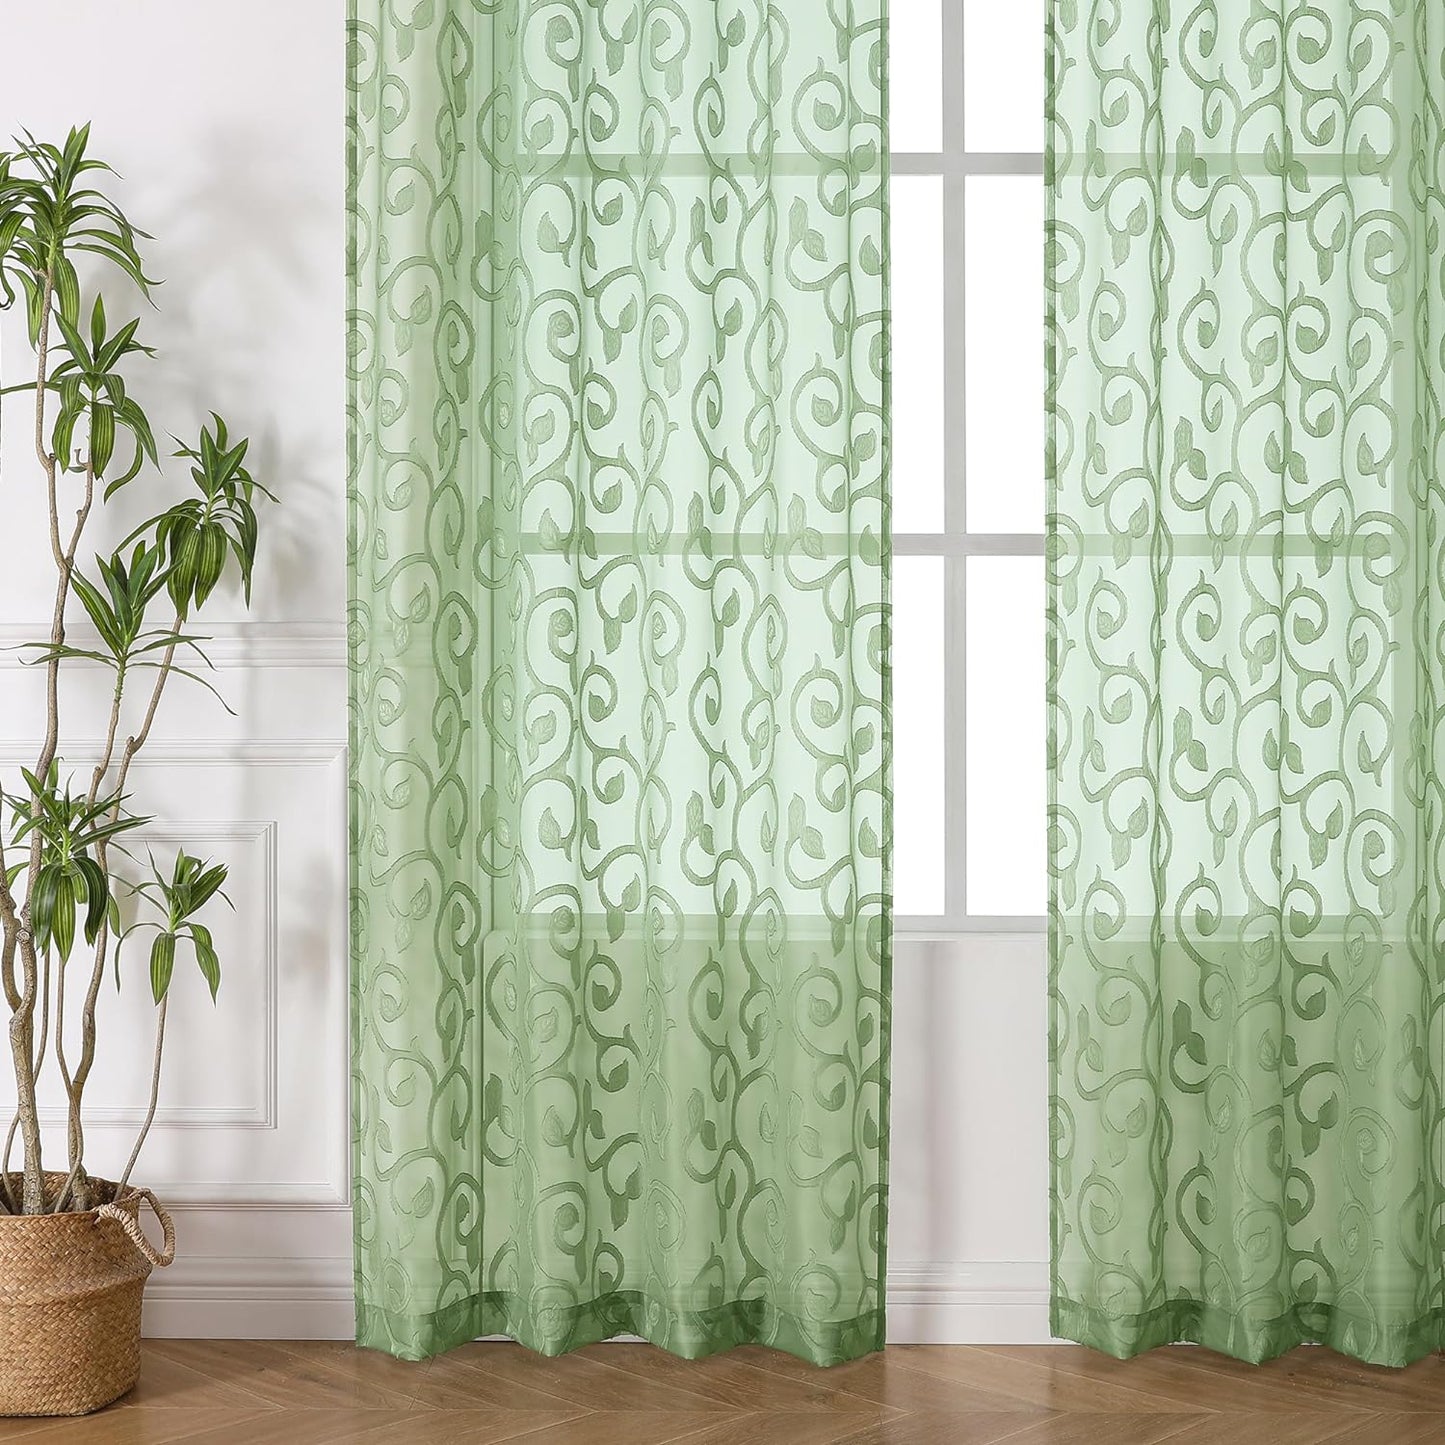 OWENIE Furman Sheer Curtains 84 Inches Long for Bedroom Living Room 2 Panels Set, Light Filtering Window Curtains, Semi Transparent Voile Top Dual Rod Pocket, Grey, 40Wx84L Inch, Total 84 Inches Width  OWENIE Yellow Green 40W X 84L 